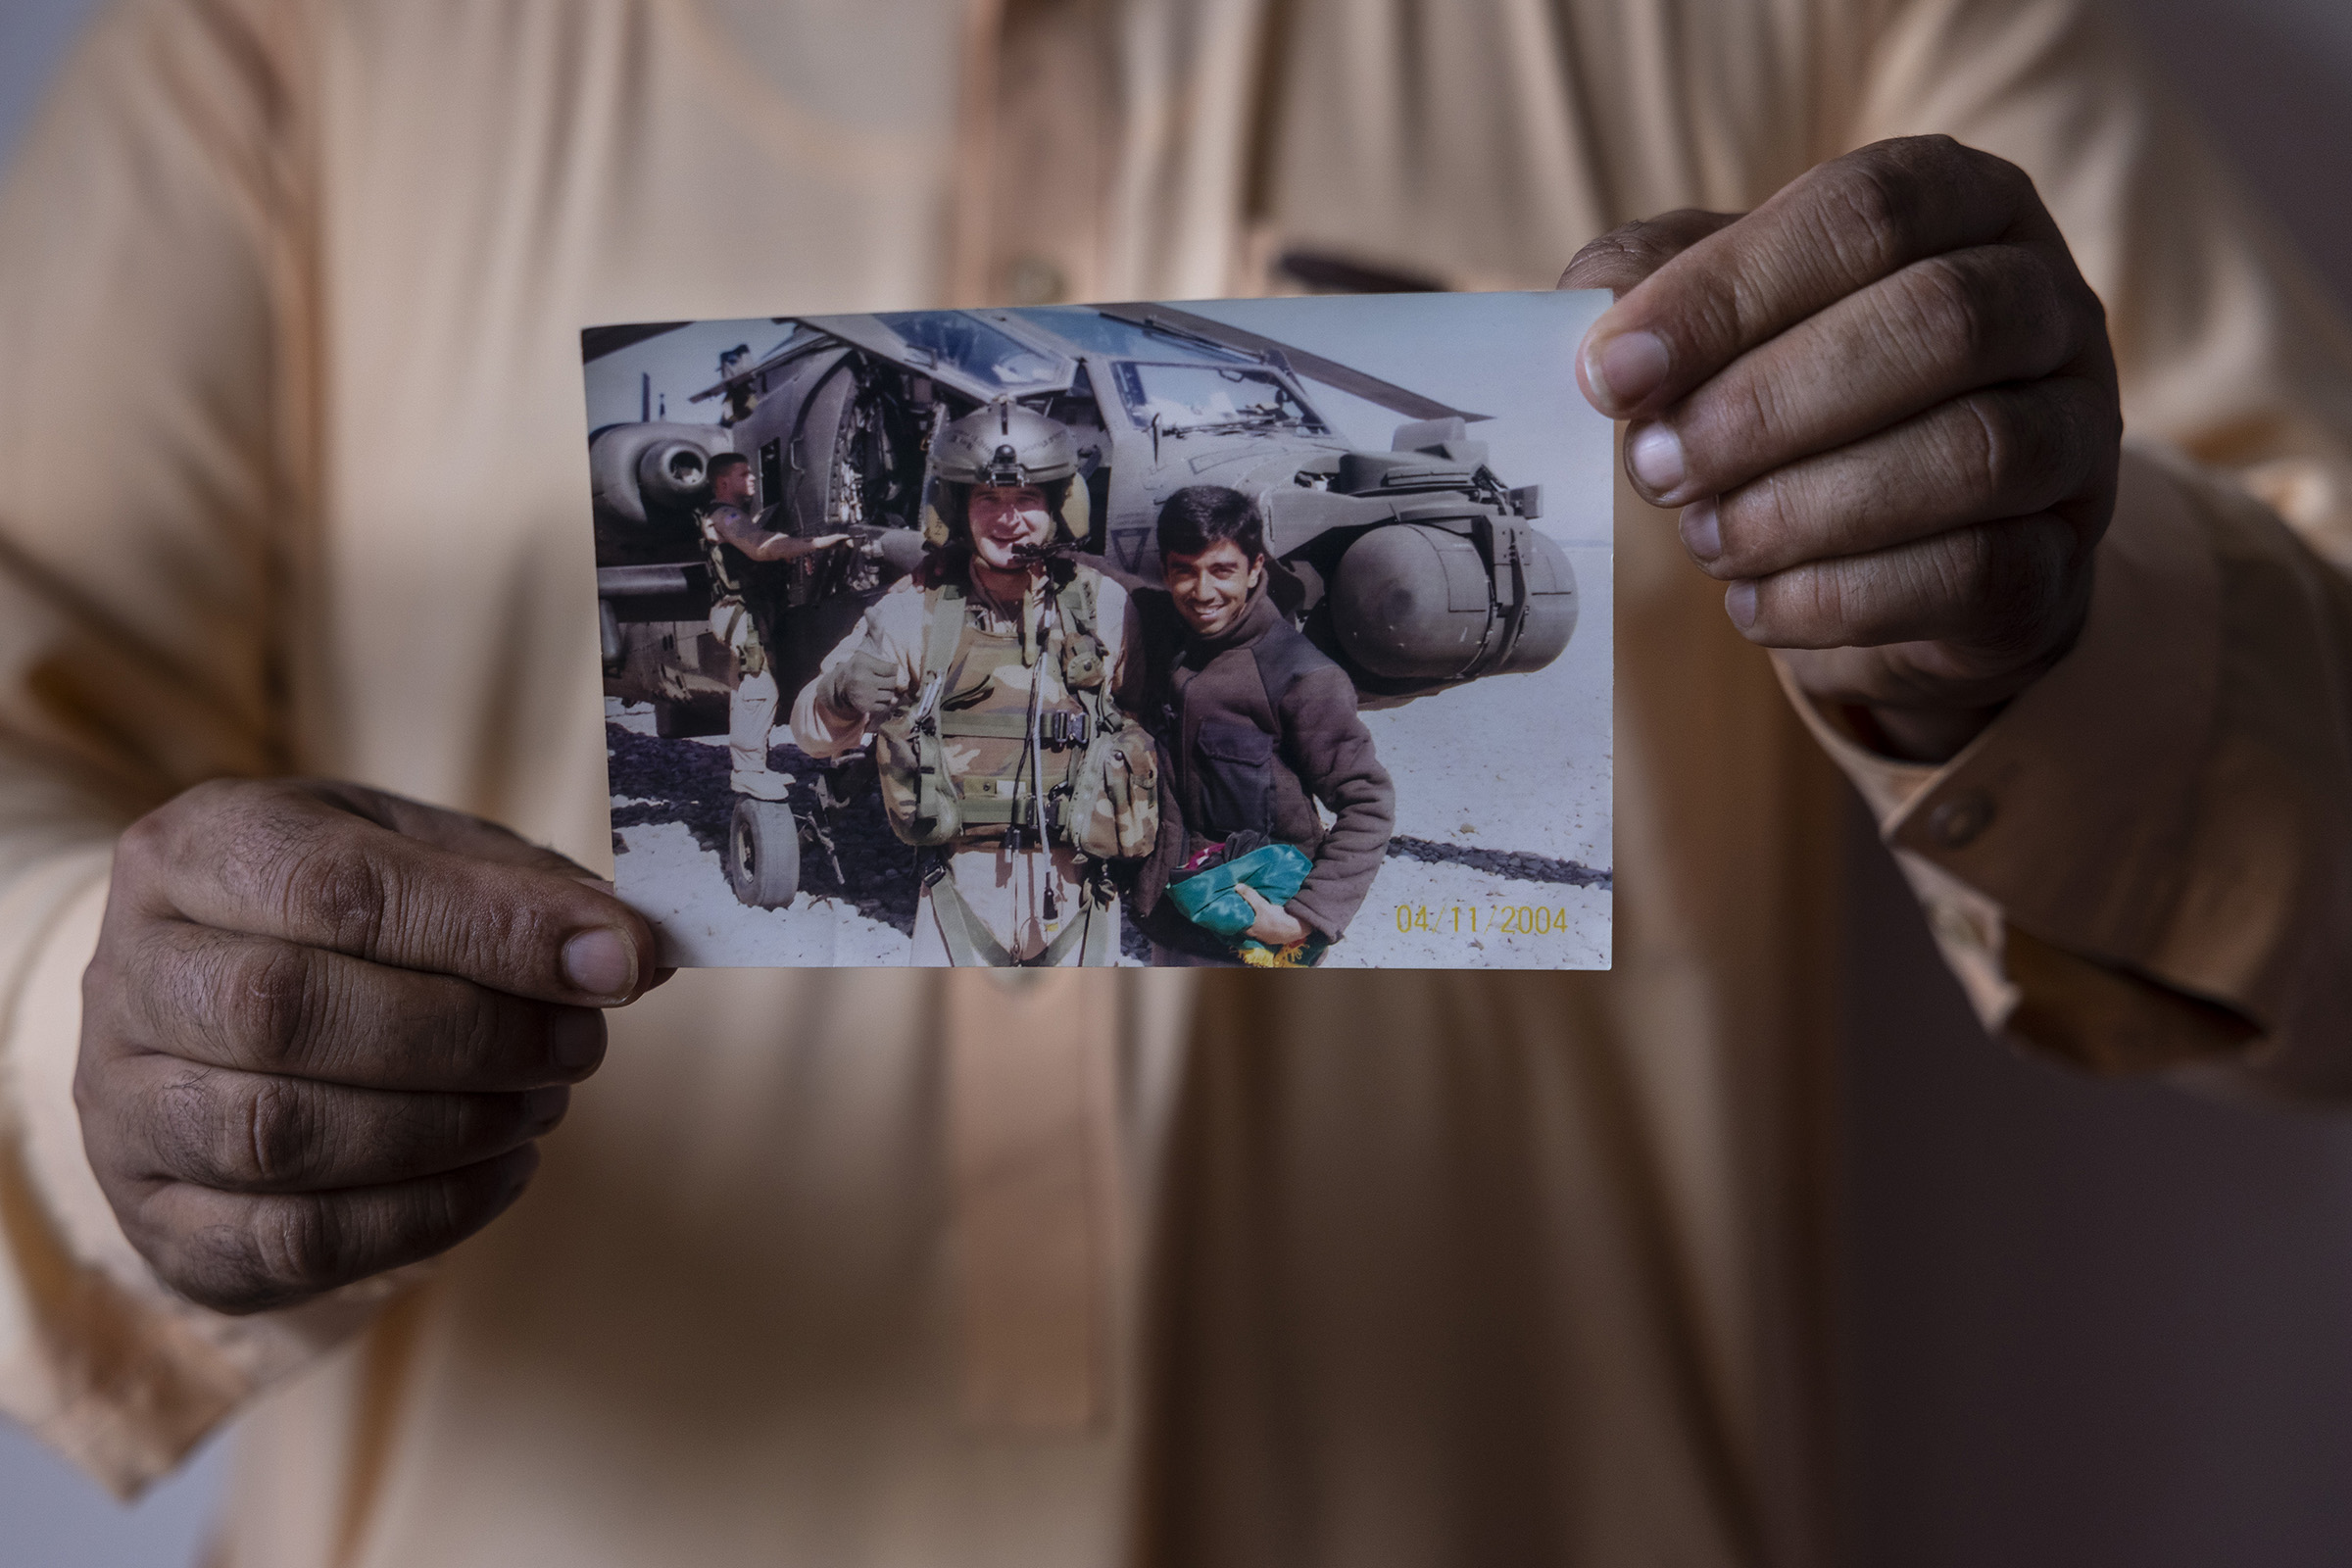 Special Immigrant Visa (SIV) applicant Mohammed Arif Ahmadzai, 41, holds an image of himself with US military personnel while at his home on August 1, 2021 in Kabul, Afghanistan. Mohammed worked for almost 8 years as a combat translator from 2003-2010 for the US Army, the Marines as well as on the Provincial Reconstruction Team (PRT) and the Special Forces in Kunar province. He applied for the the Special Immigrant Visa (SIV) paying the visa and medical fees costing him over $2,000 but was denied in 2014 without what he viewed as sufficient explanation. He is currently appealing his case. (Paula Bronstein-Getty Images)